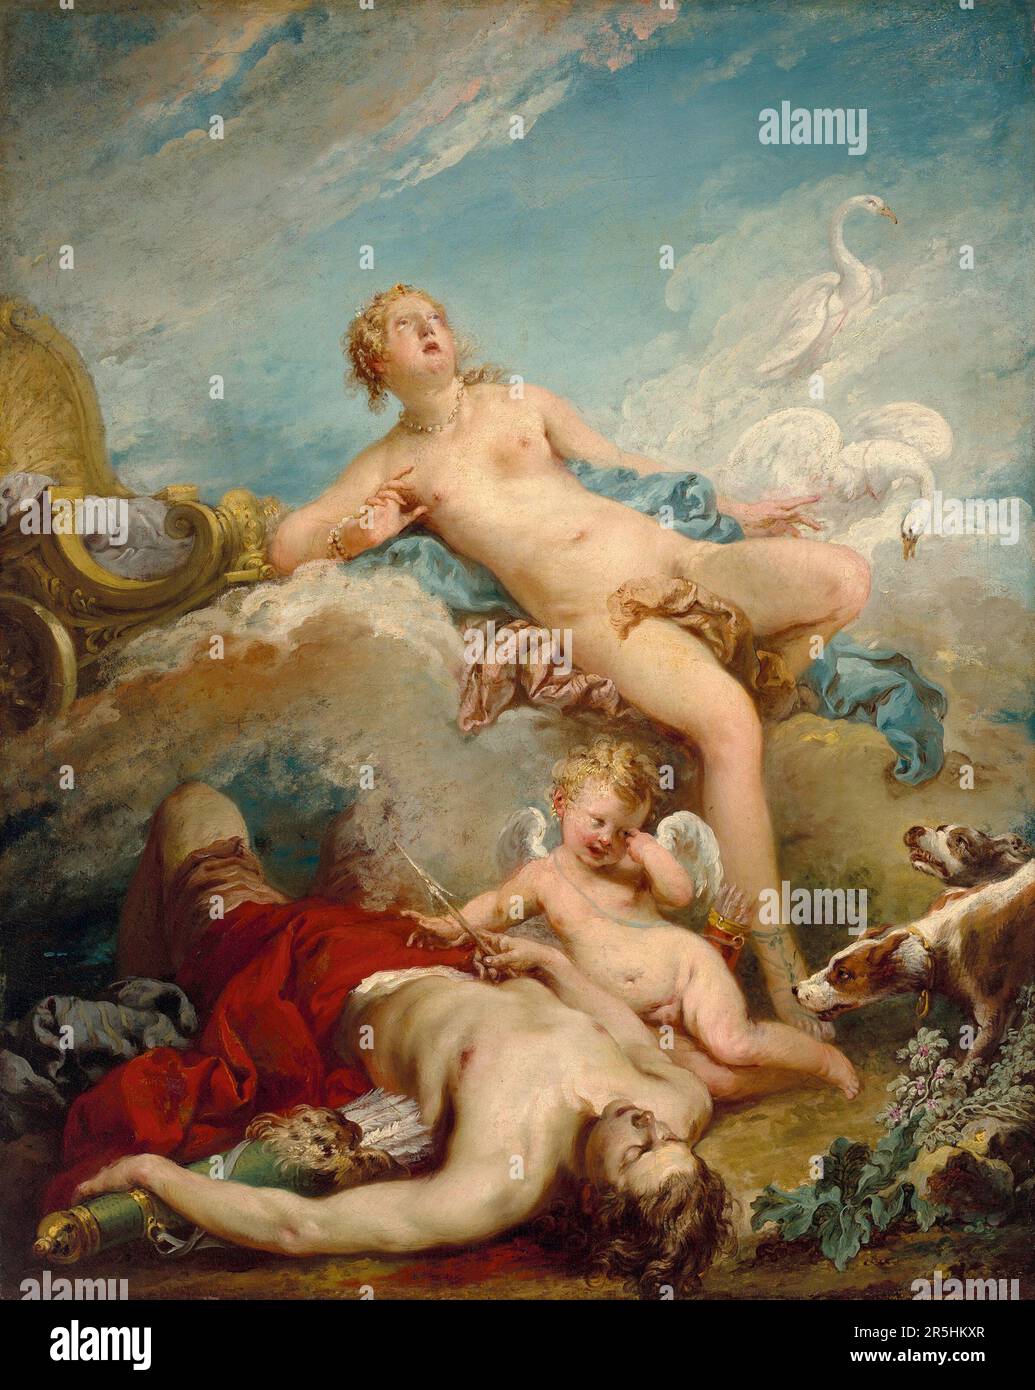 Venus discovering the dead Adonis painted by Francois Bouchard . Though little known today, François Boucher was one of the most celebrated painters of the 18th Century in France. He painted classical themes in the baroque and Rococo styles. His patron was Madame de Pompadour and his work was so popular that he eventually became Premier Peintre du Roi (First painter to the King), a prestigious court position in the Ancien Regime. Stock Photo